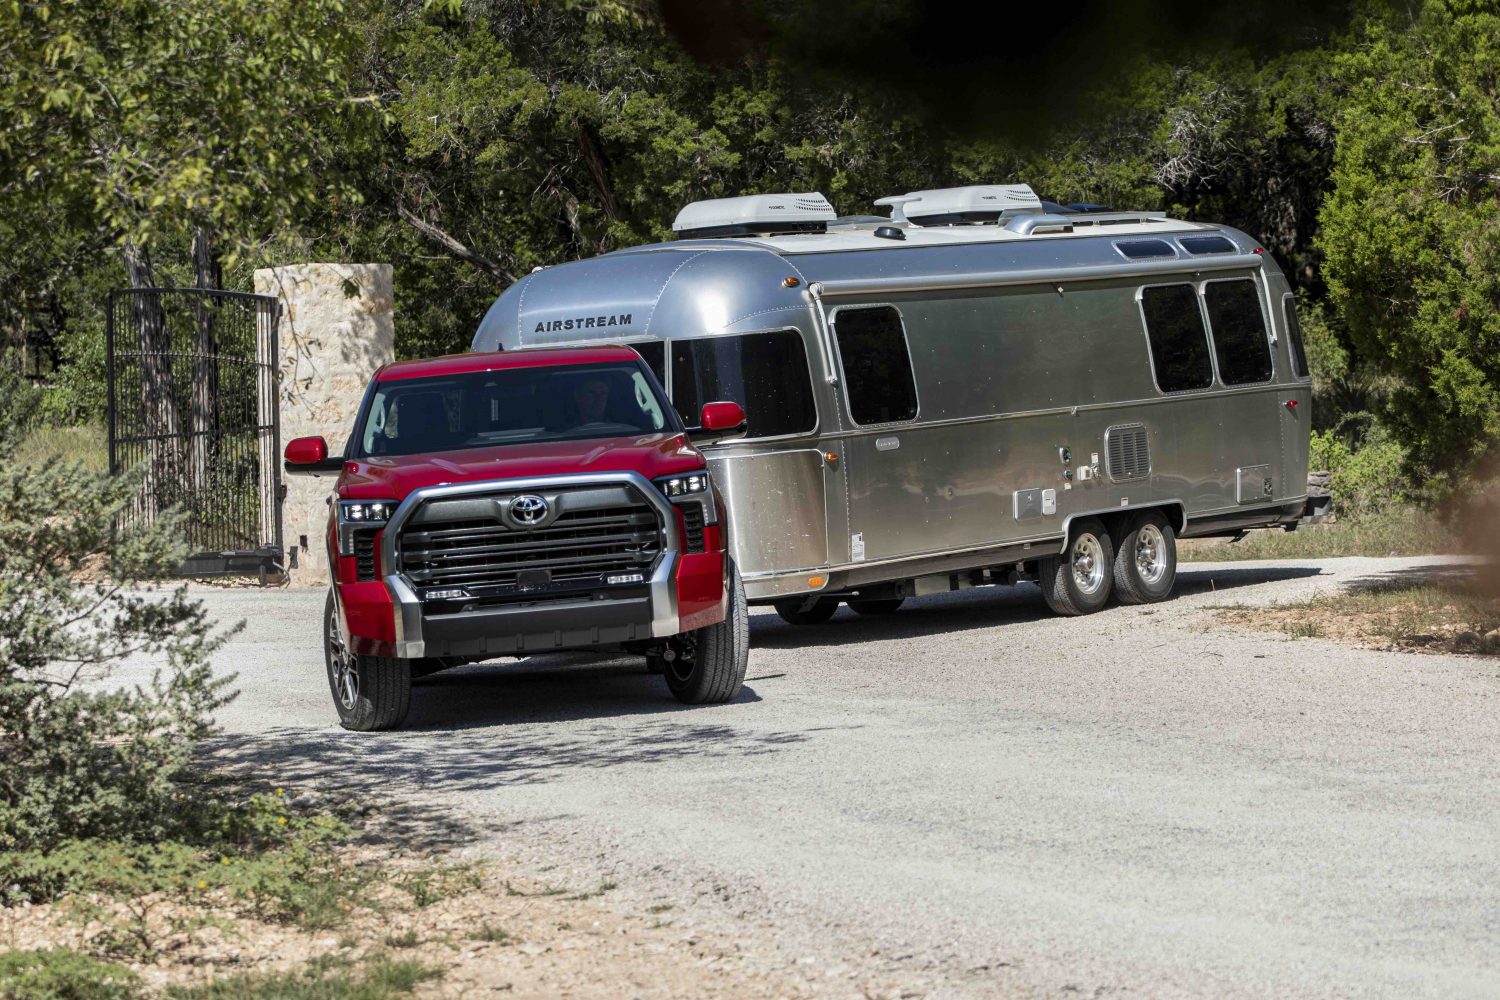 Red Toyota Tundra pickup truck demonstrating its towing capacity by pulling a camper trailer.